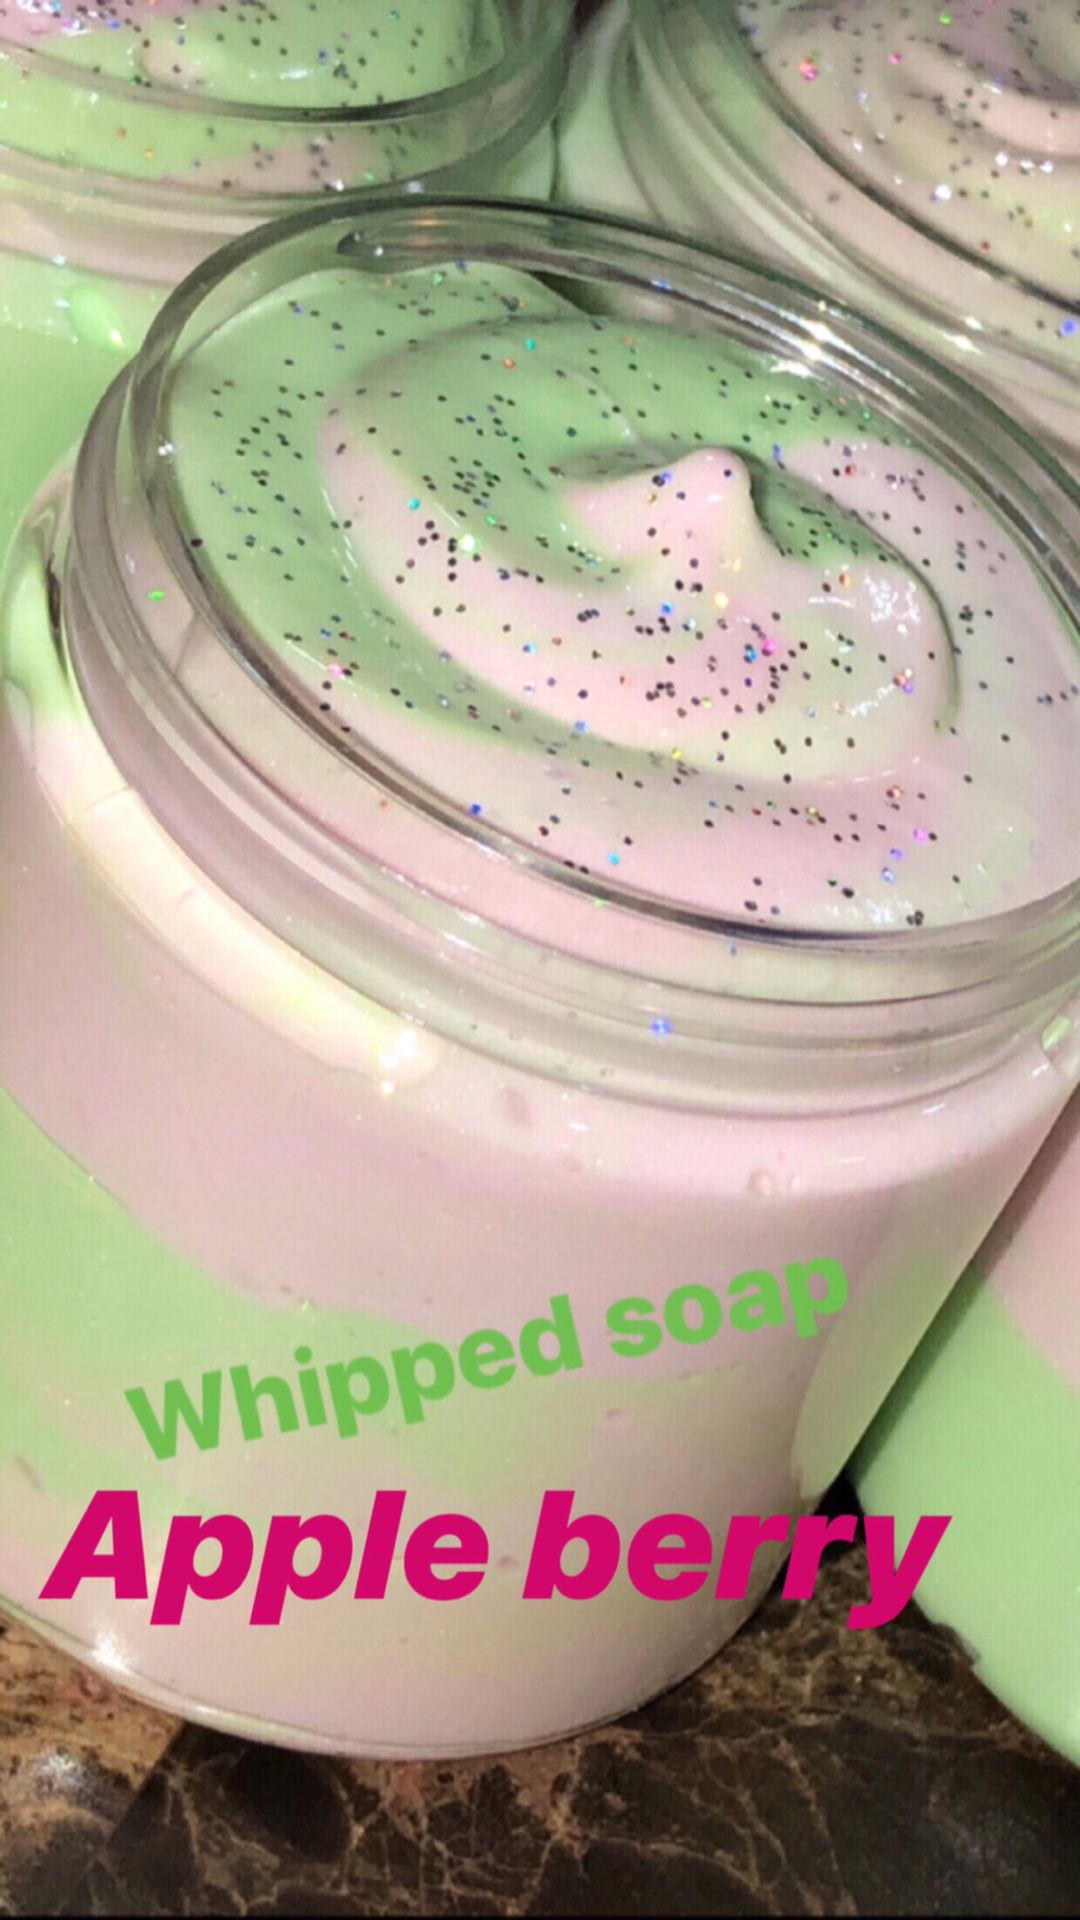 whipped soap available in several fragrances